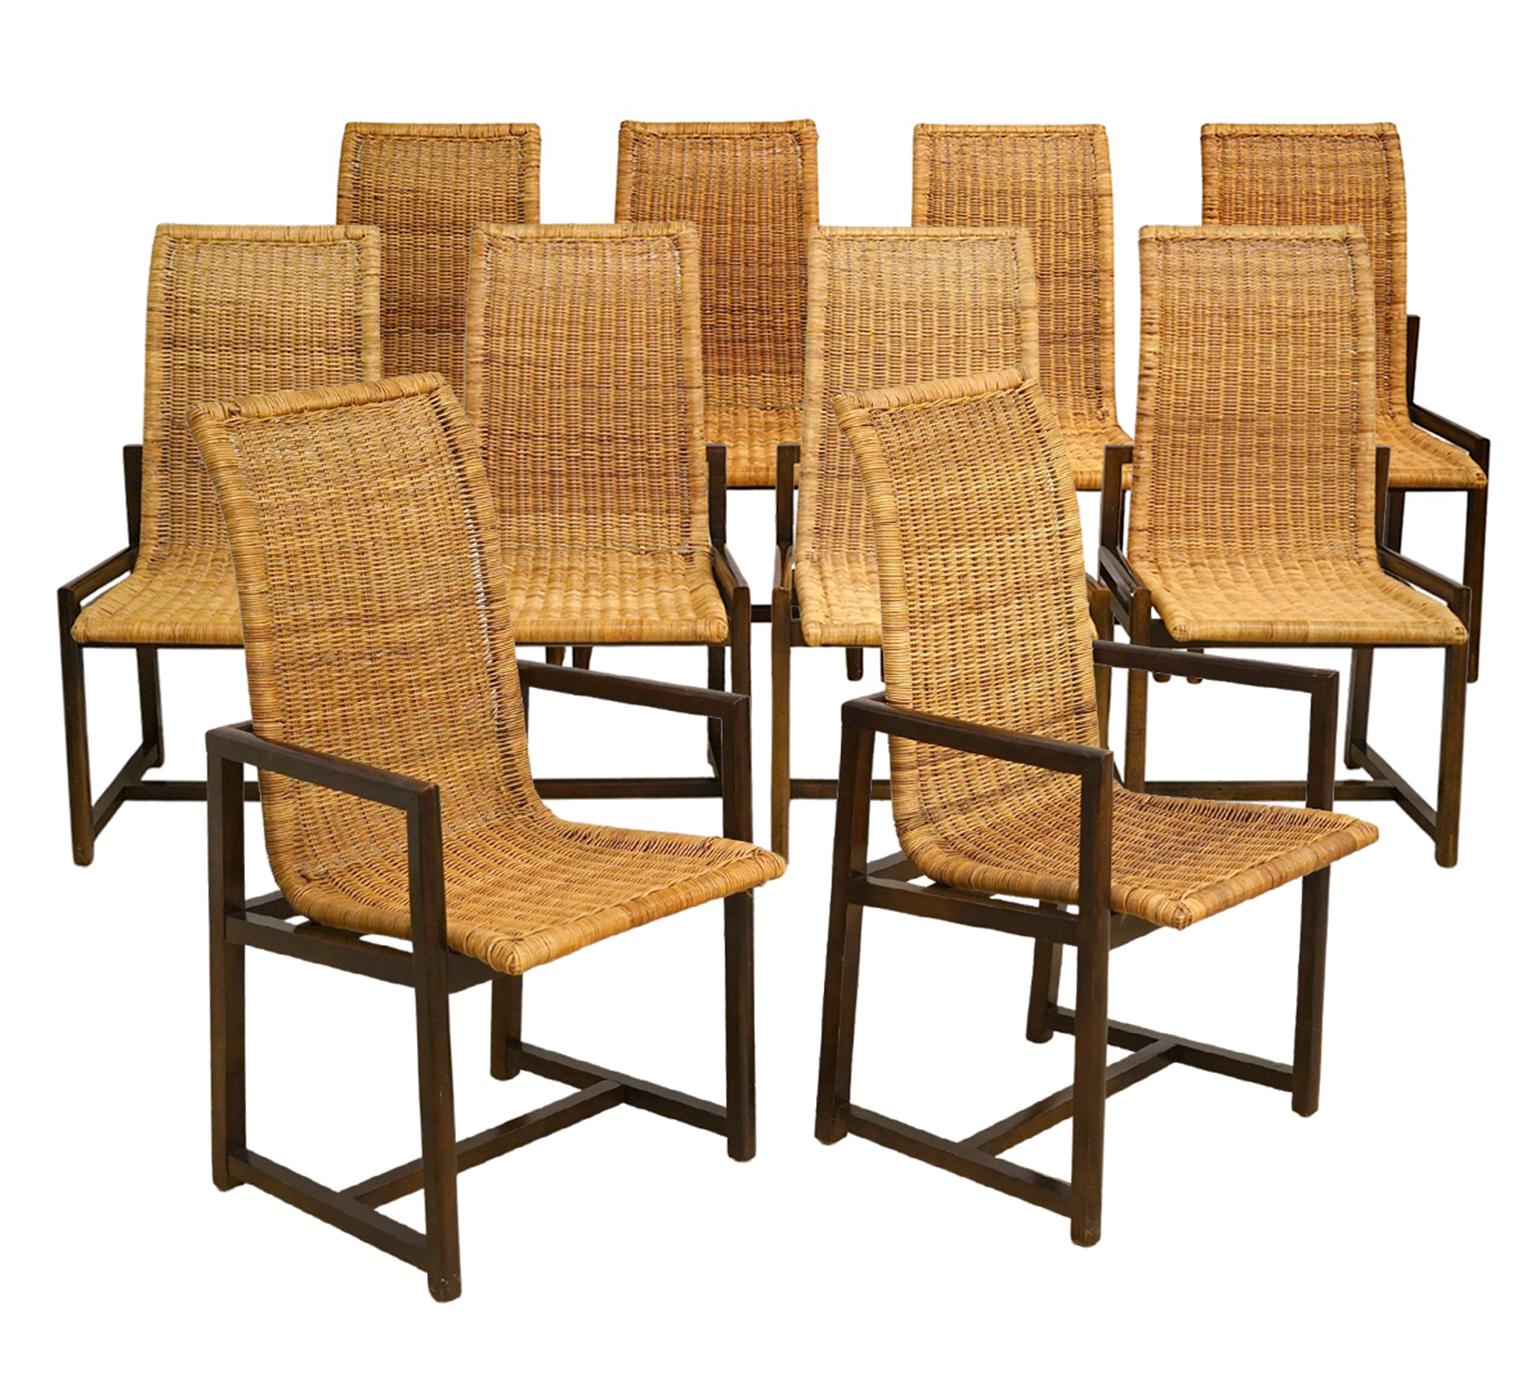 Hollywood Regency Wonderful Set of 10 High Back Woven Rattan and Beach Wood Dining Chairs